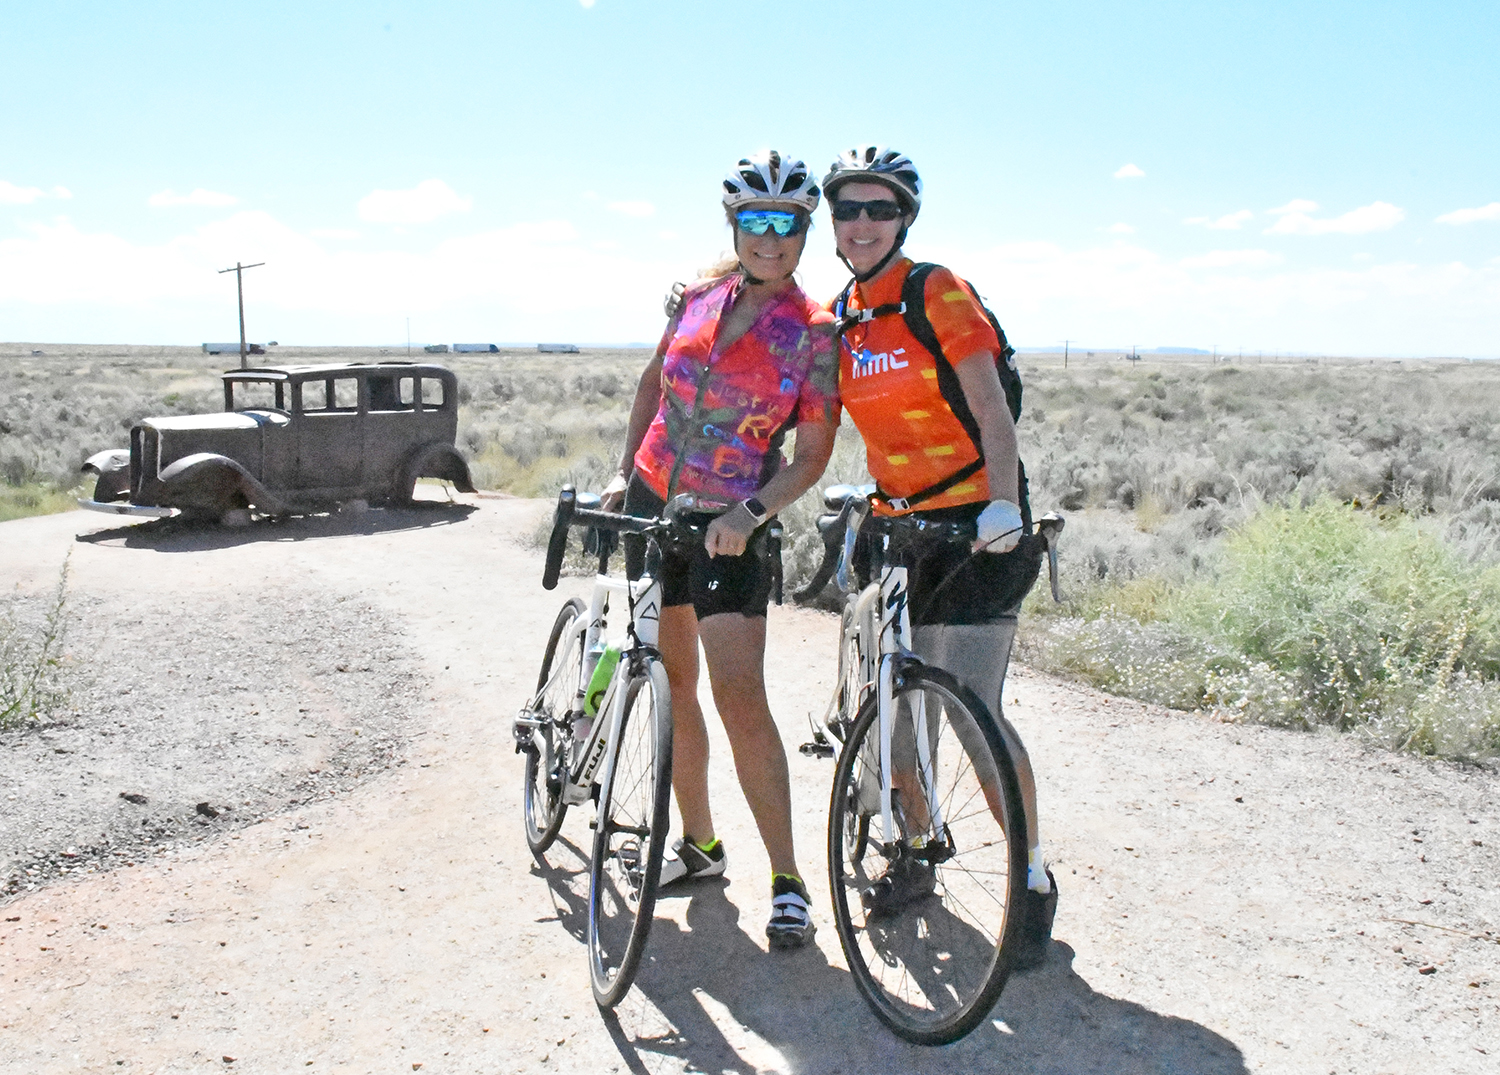 Debee Demolina and Diane Hoffman took on the full 100km ride together. Bribed by the appeal of an ending Navajo taco meal, Diane (who initially was only going to do the half-century ride) ended up doing the full ride with her friend. They enjoyed their first-ever trip to the area and even stayed at the iconic WigWam Hotel in Holbrook the night before.